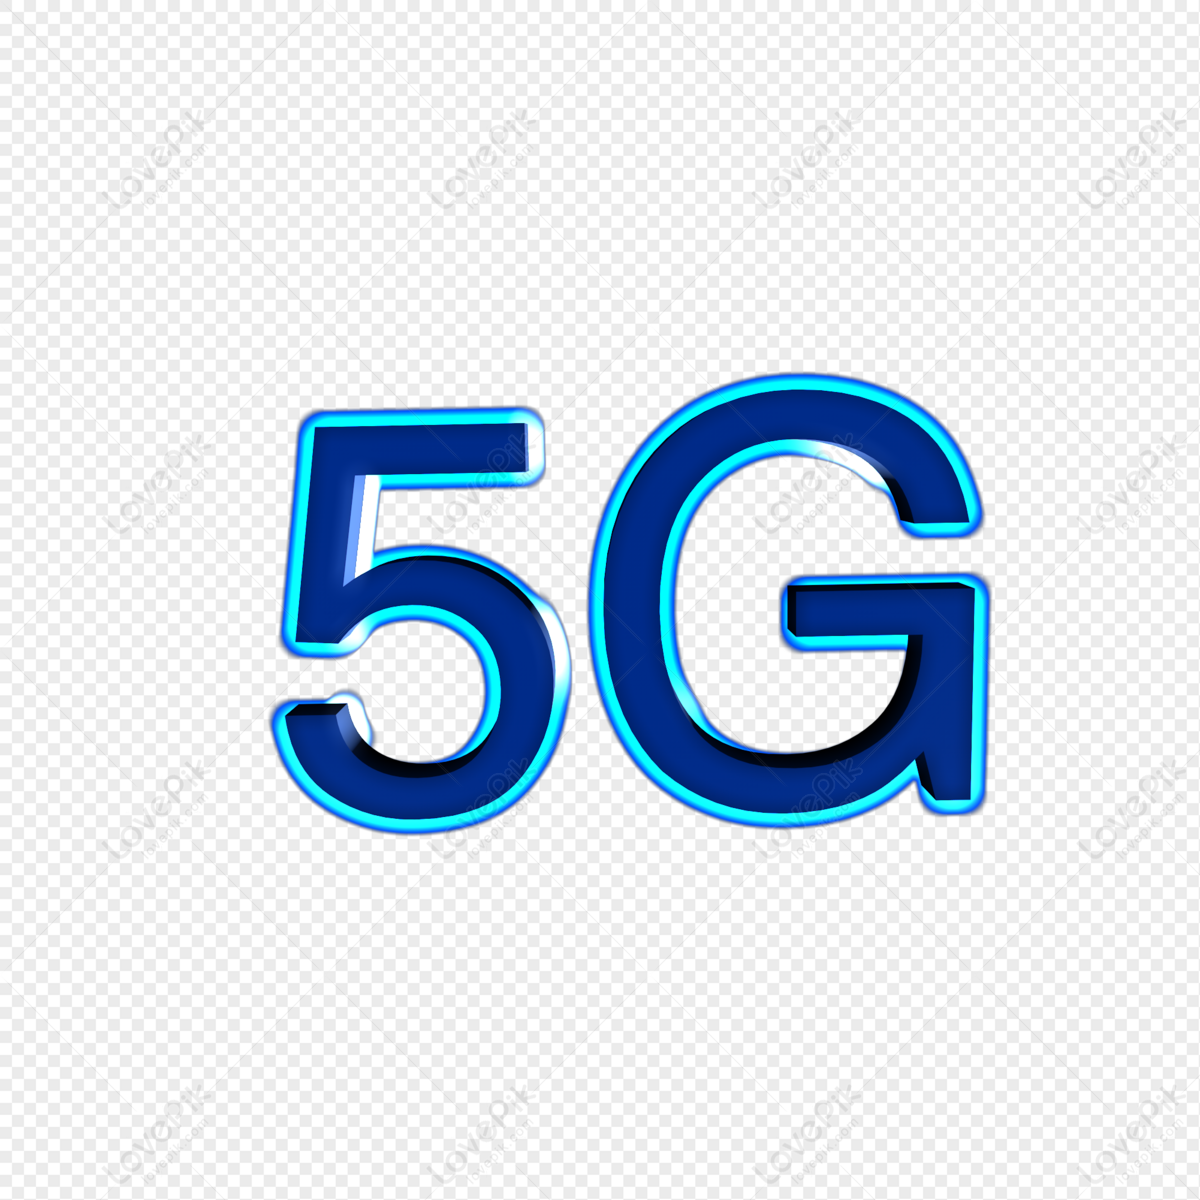 MoU signed between 5G India Forum and 5G-MAG